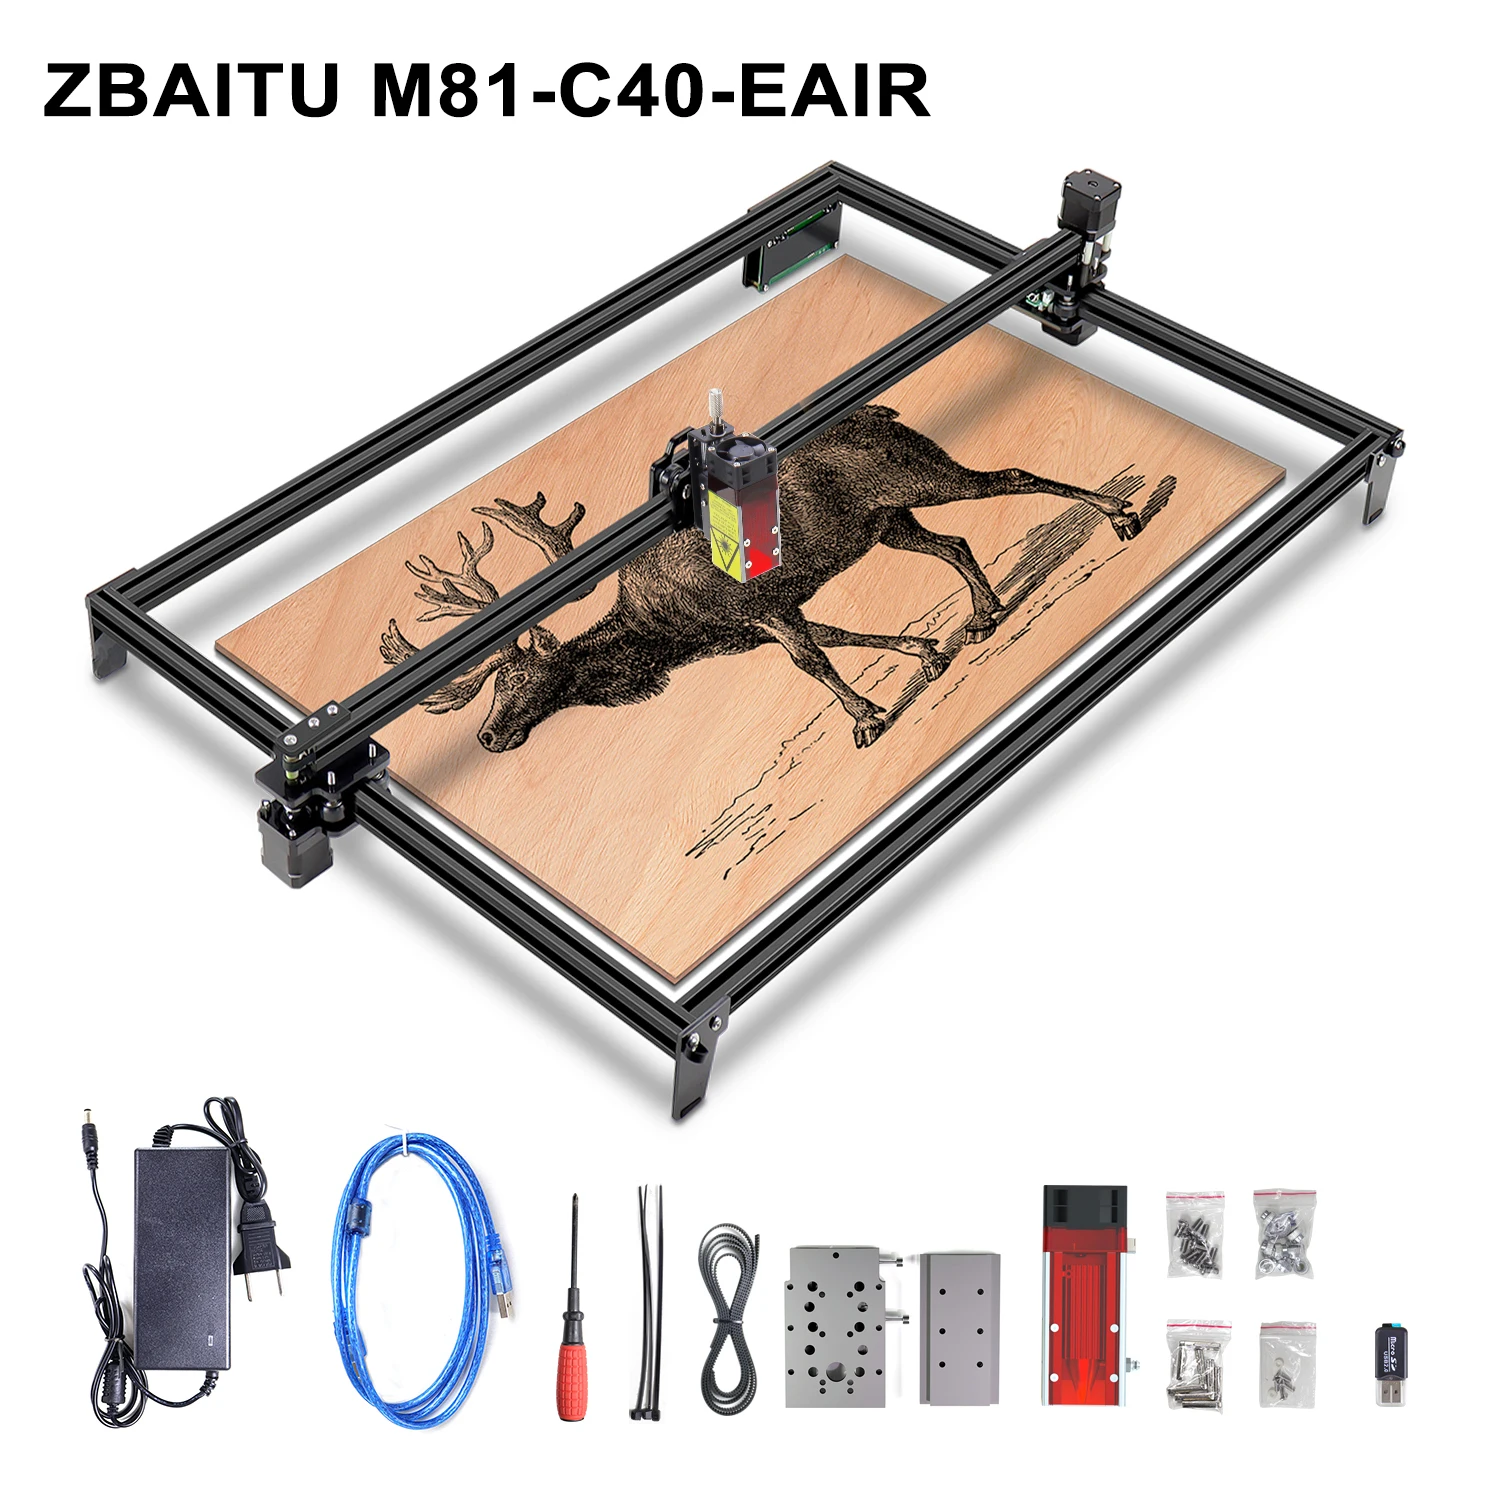 Wifi Offline Printing 40W CNC Laser Engraver Cutter Printer DIY Kits Cutting Engraving Machine Tool-Air Assisted Blow System